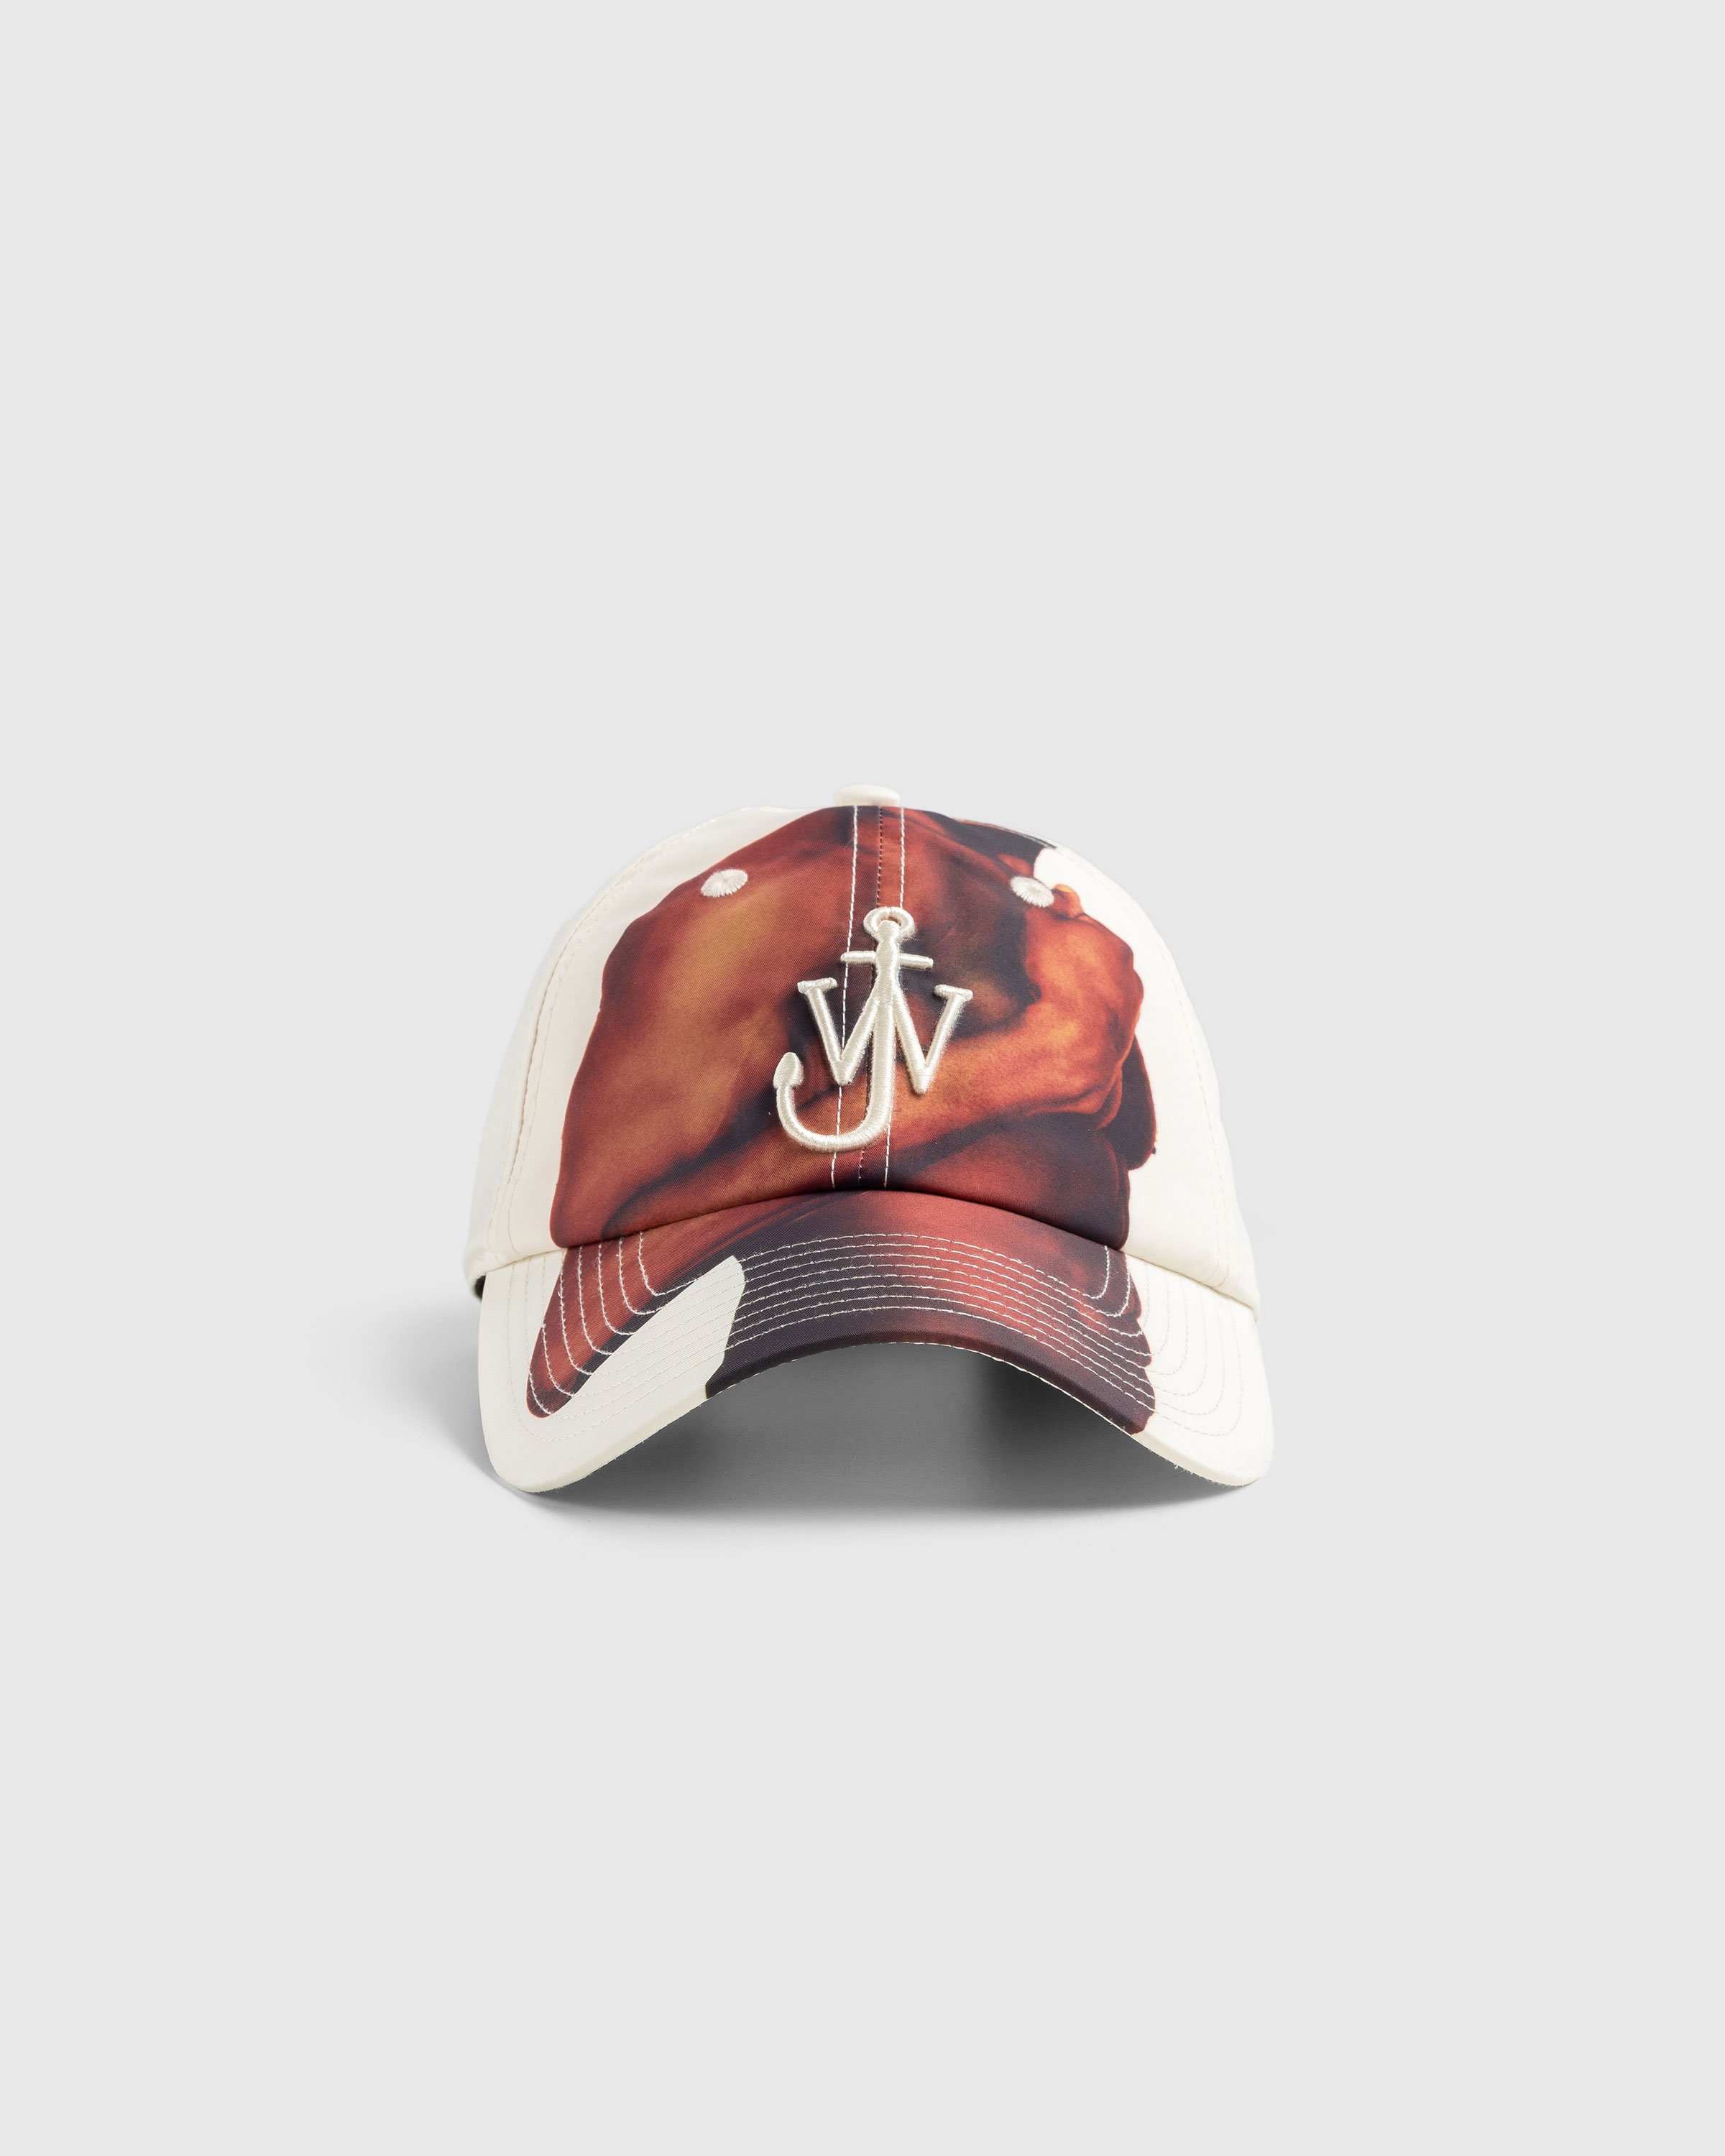 J.W. Anderson - Logo Embroidered Baseball Cap Off White - Accessories - White - Image 2